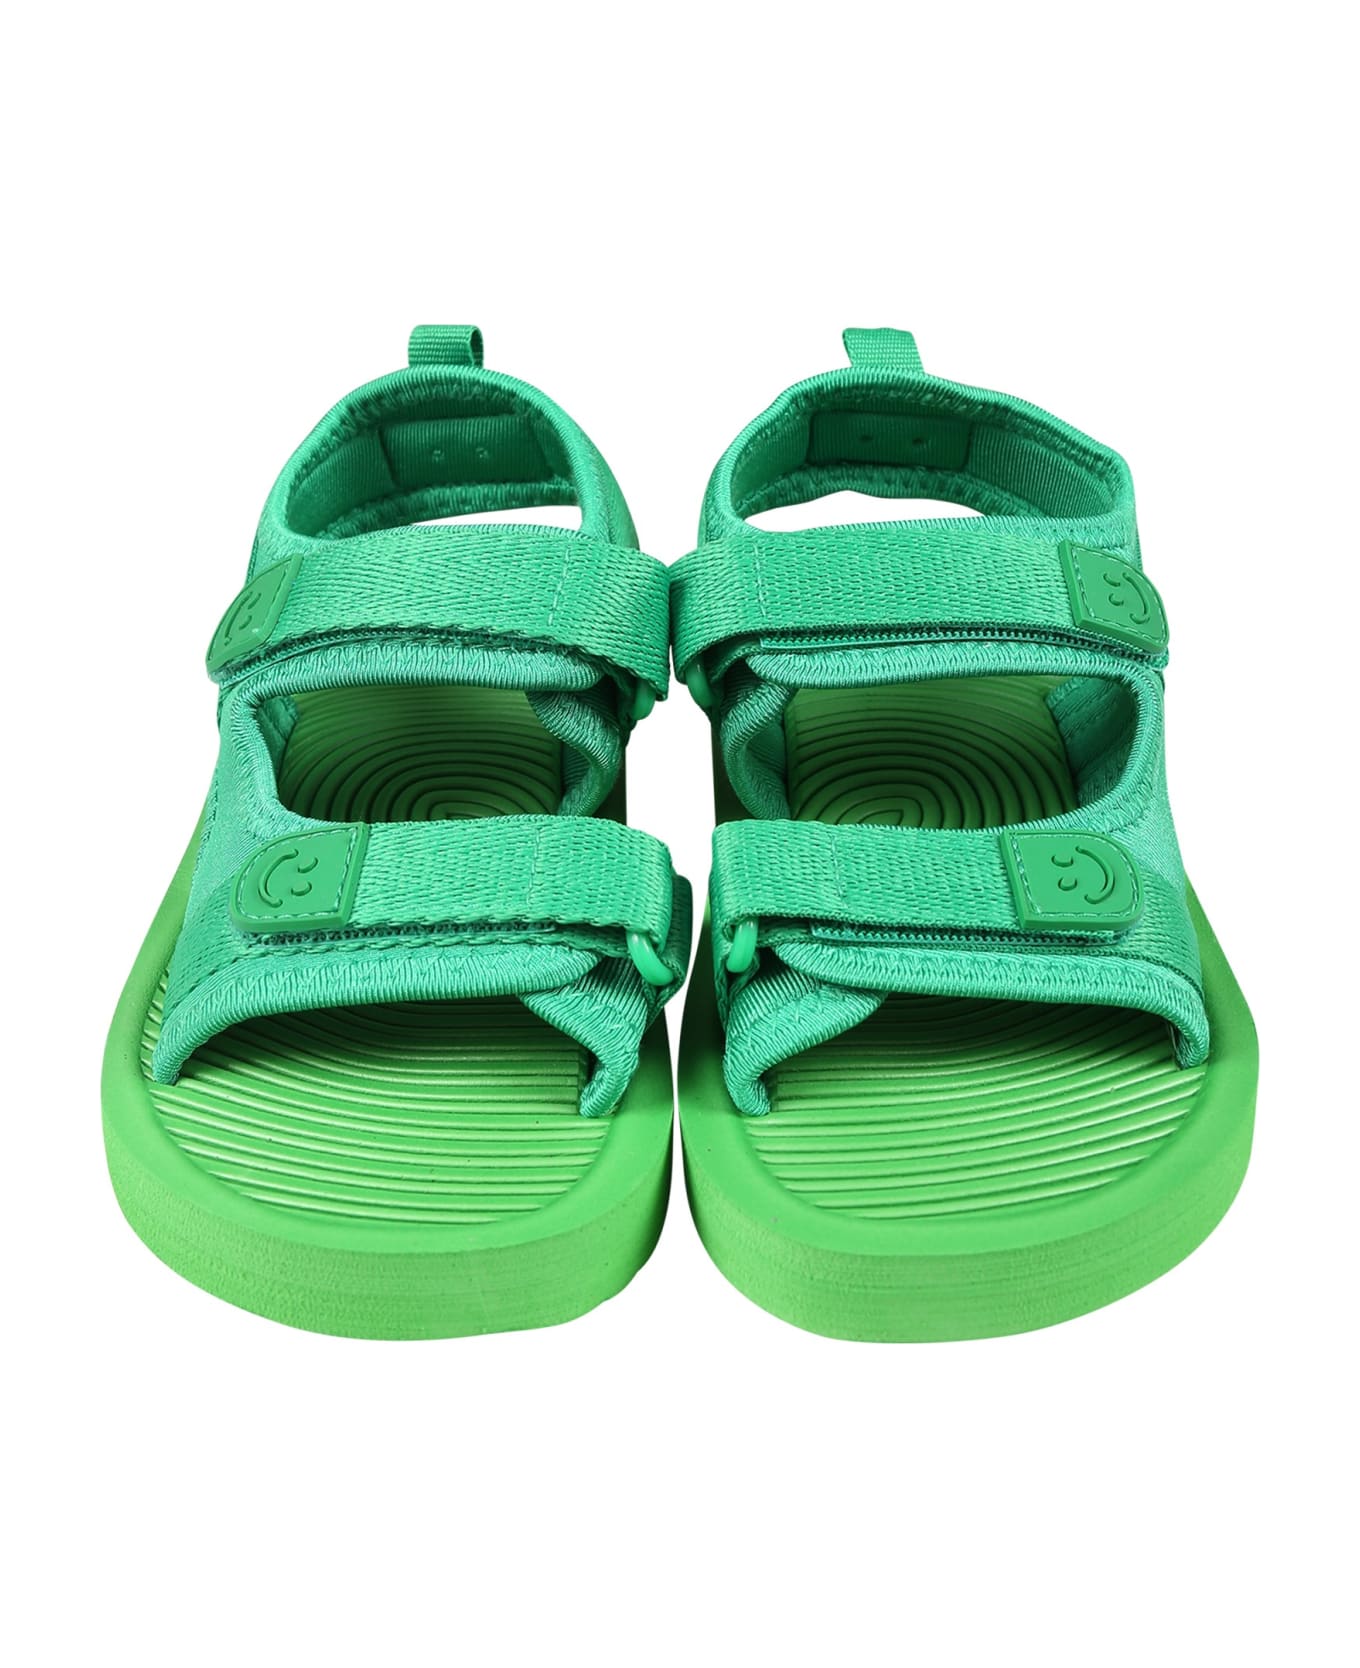 Molo Green Sandals For Babykids With Logo - Green シューズ